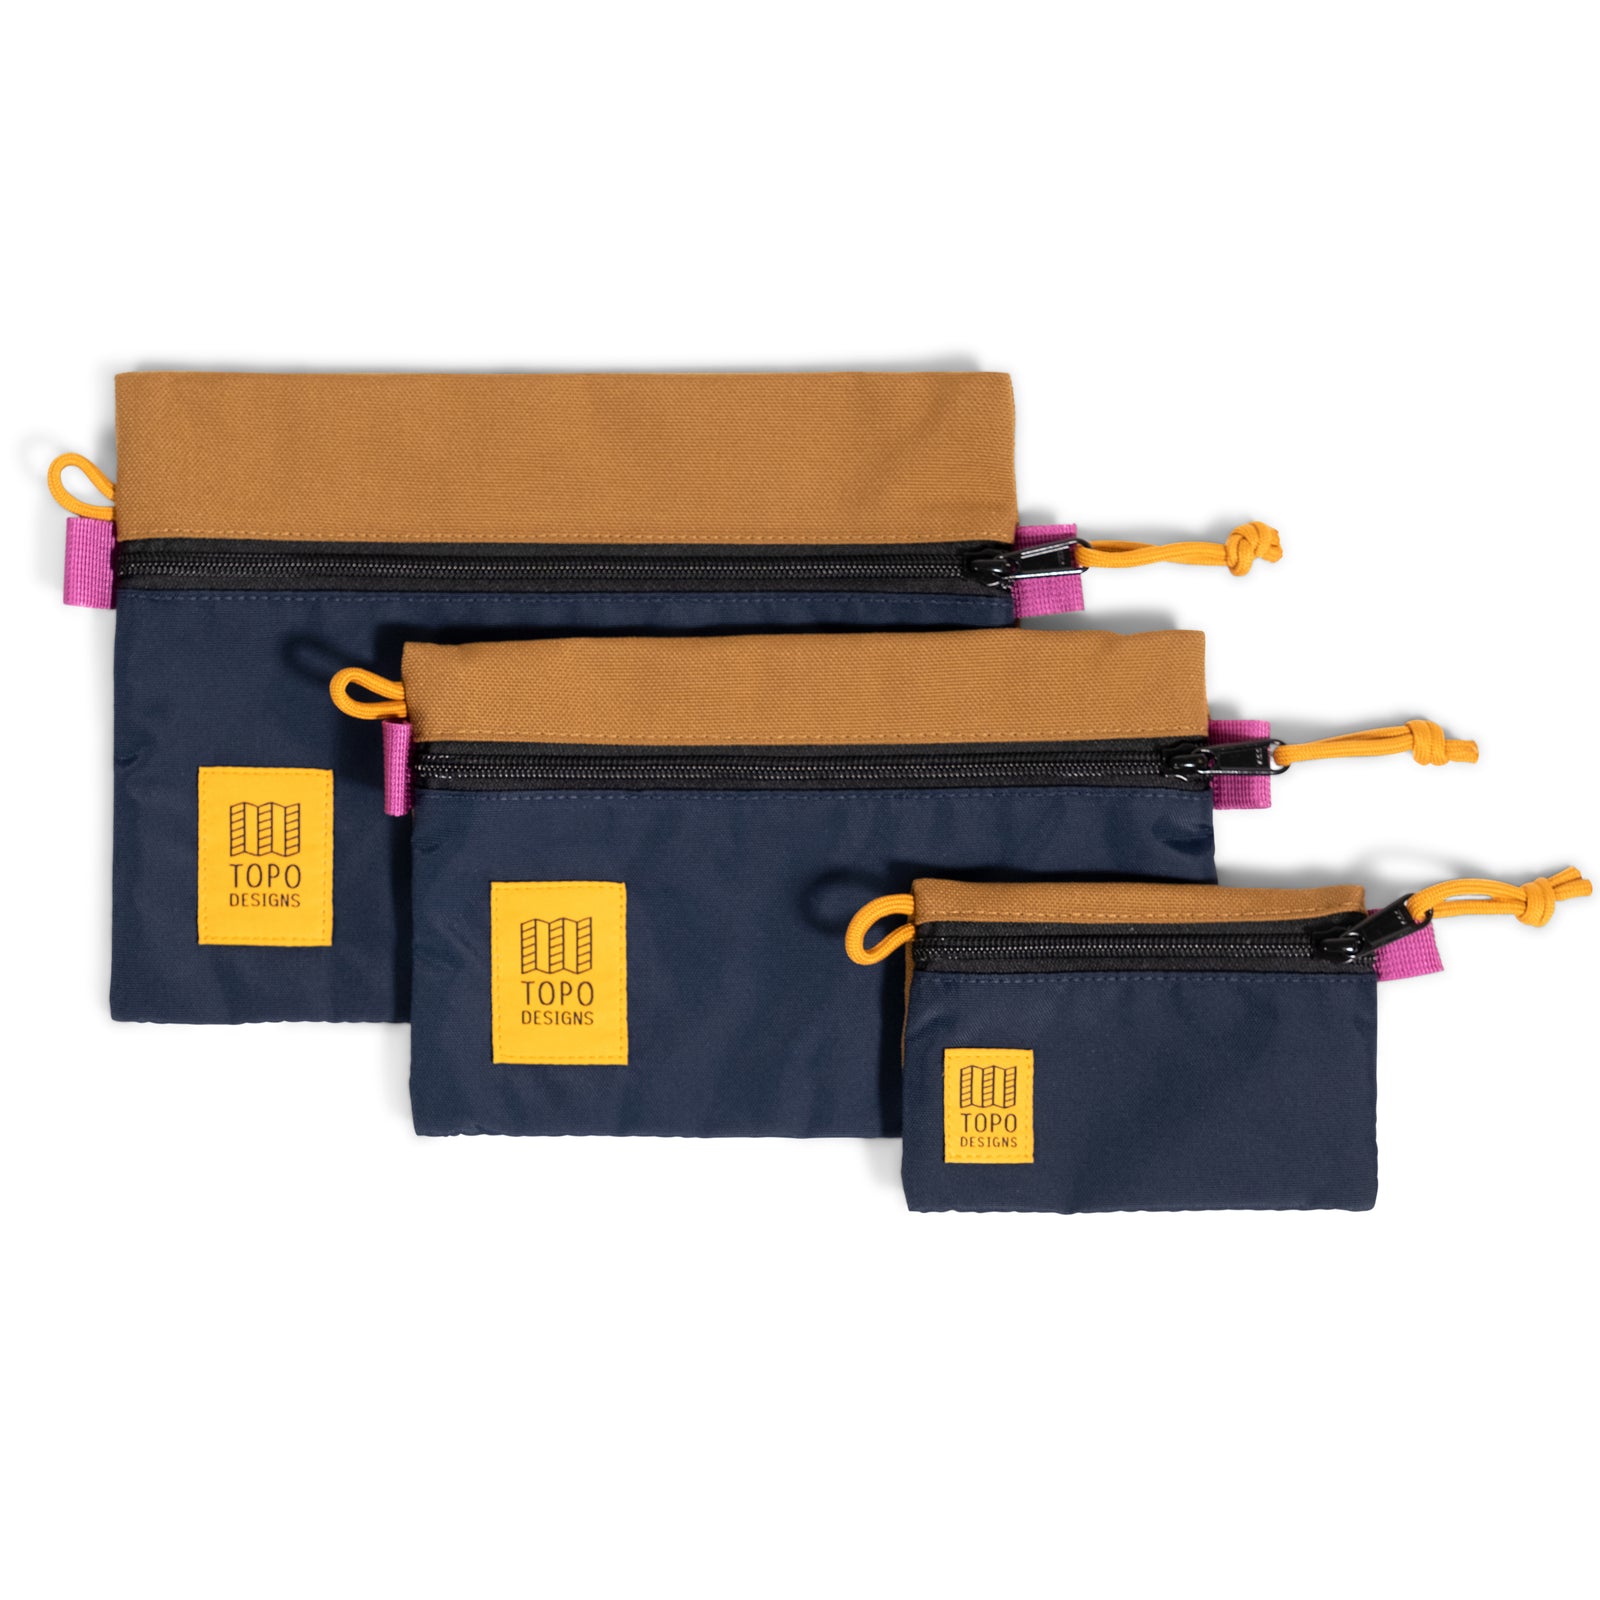 Topo Designs Accessory Bags - product shot of the "Medium", "Small", and "Micro" accessory bags in "Dark Khaki / Navy".